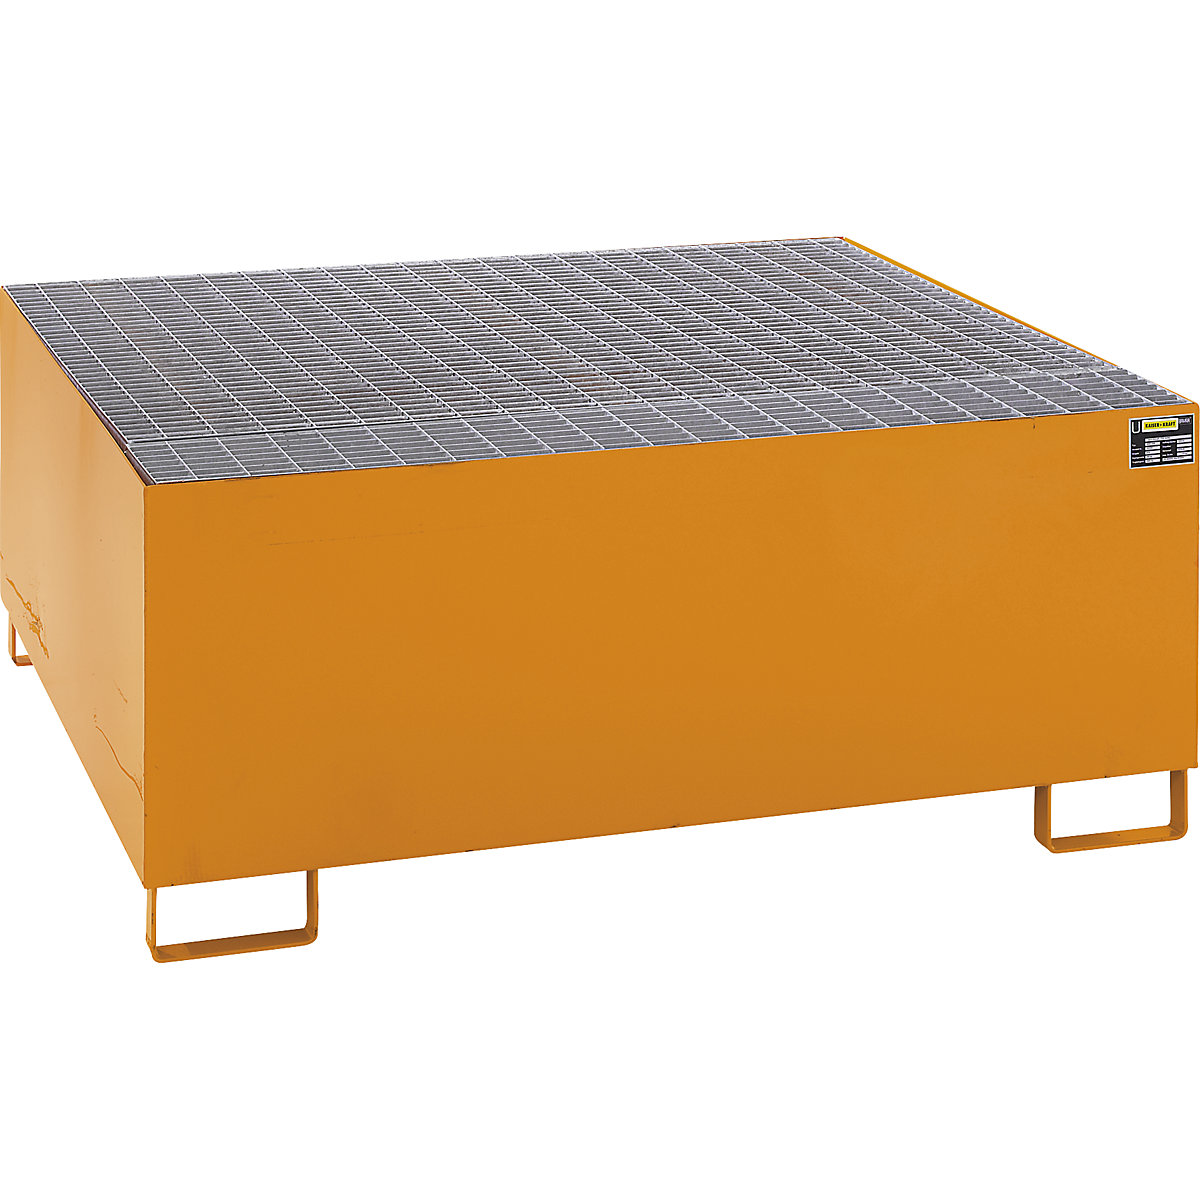 Steel sump tray for IBC/CTC tank containers – eurokraft pro, LxWxH 1460 x 1460 x 620 mm, sump capacity 1000 l, painted, orange RAL 2000-3